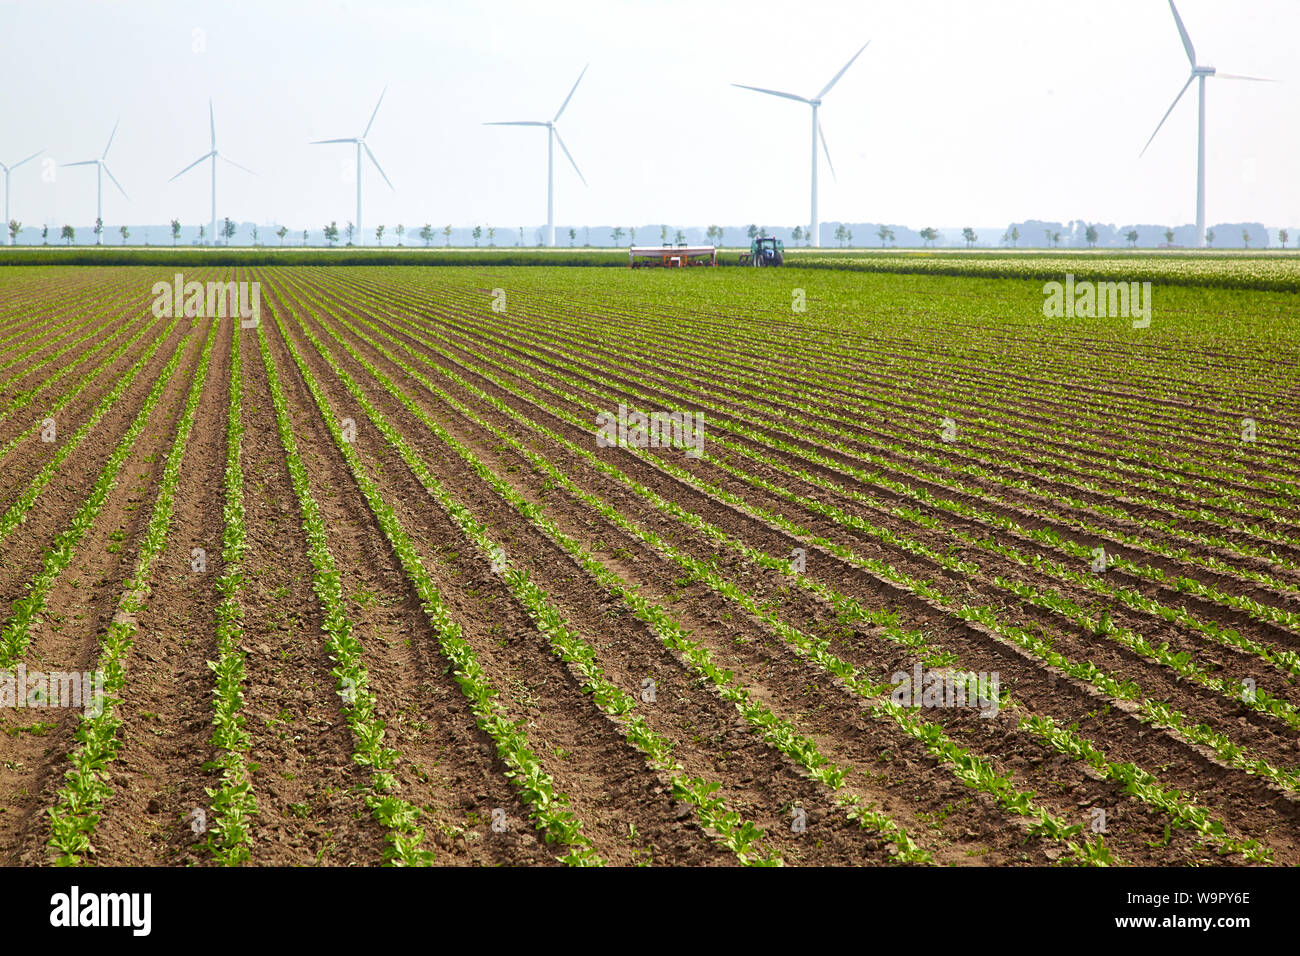 Farming plot with vertical rows of organic chicory plants with in the background a tractor working the soil and a row of wind turbines Stock Photo